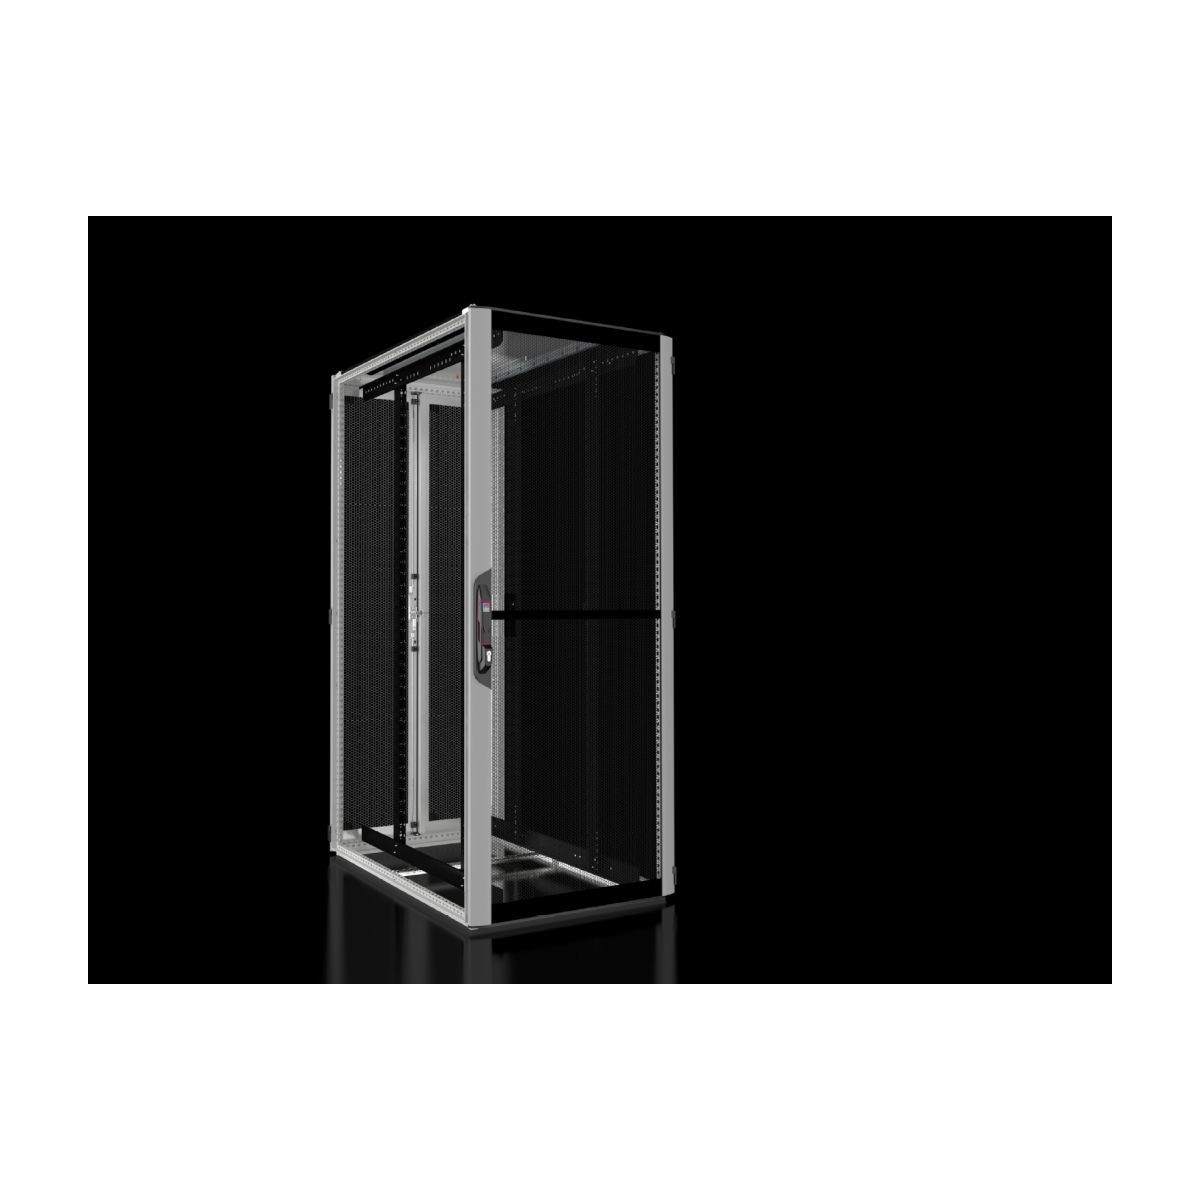 Rittal 5311.116 - 1 pc(s) - Rack - RAL 7,035